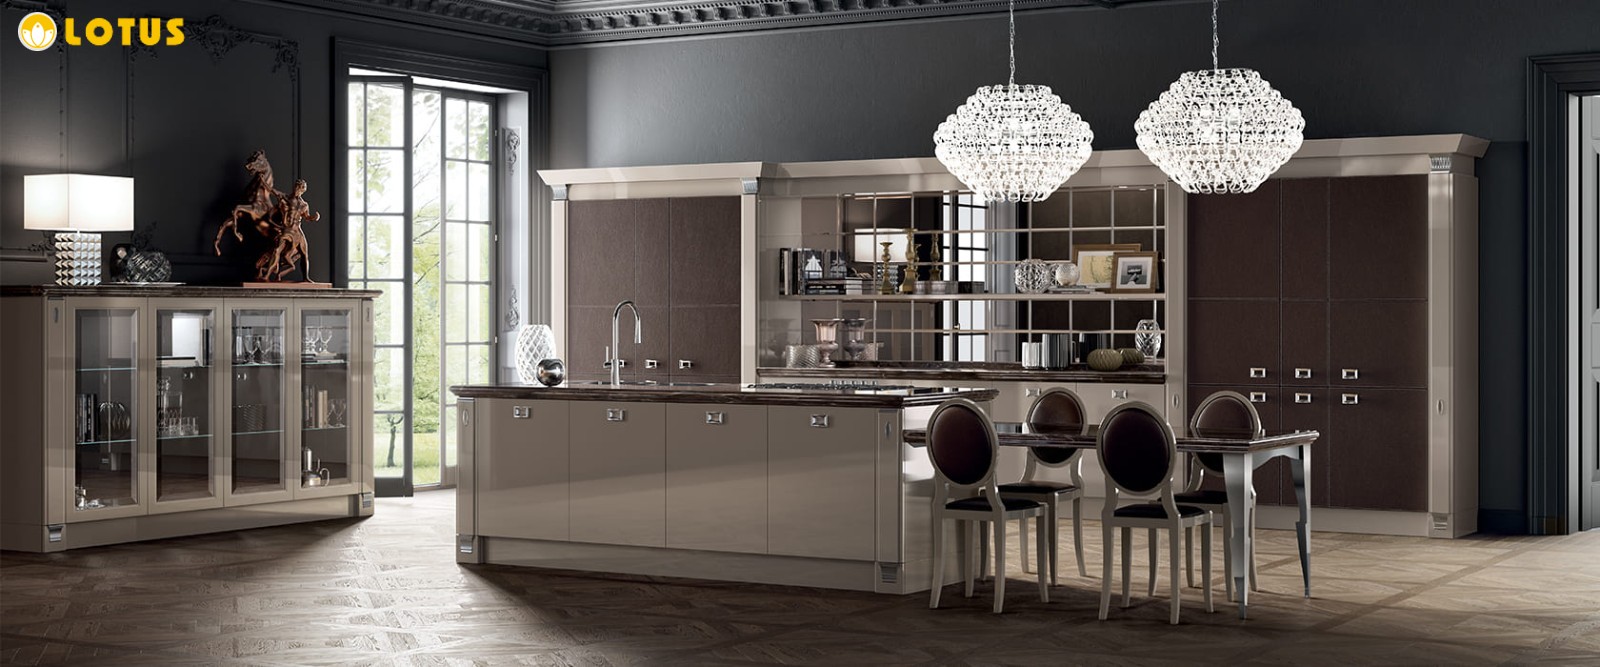 9399_Exclusiva-kitche-by-Scavolini-gloss-lacquered-Mink